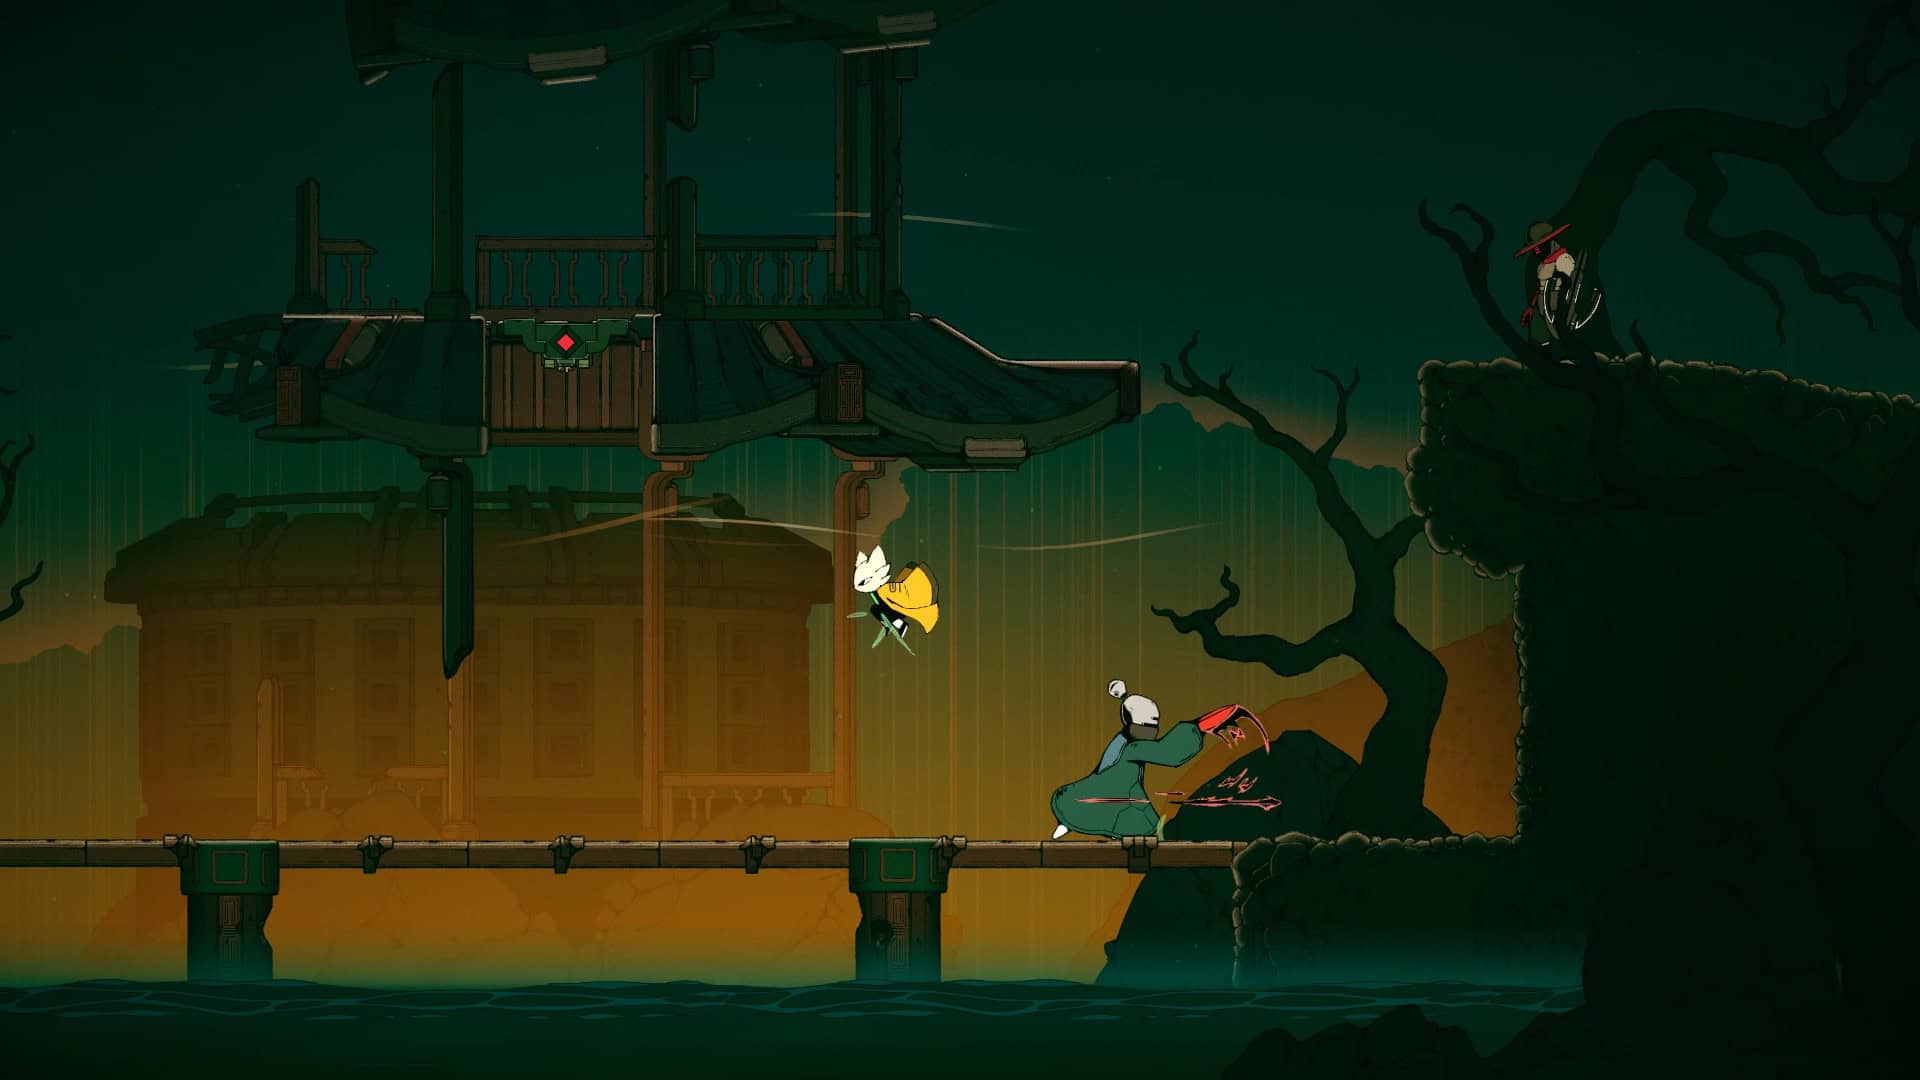 nine sols release date - a character jumps over a foe in a 2D side-scroller.